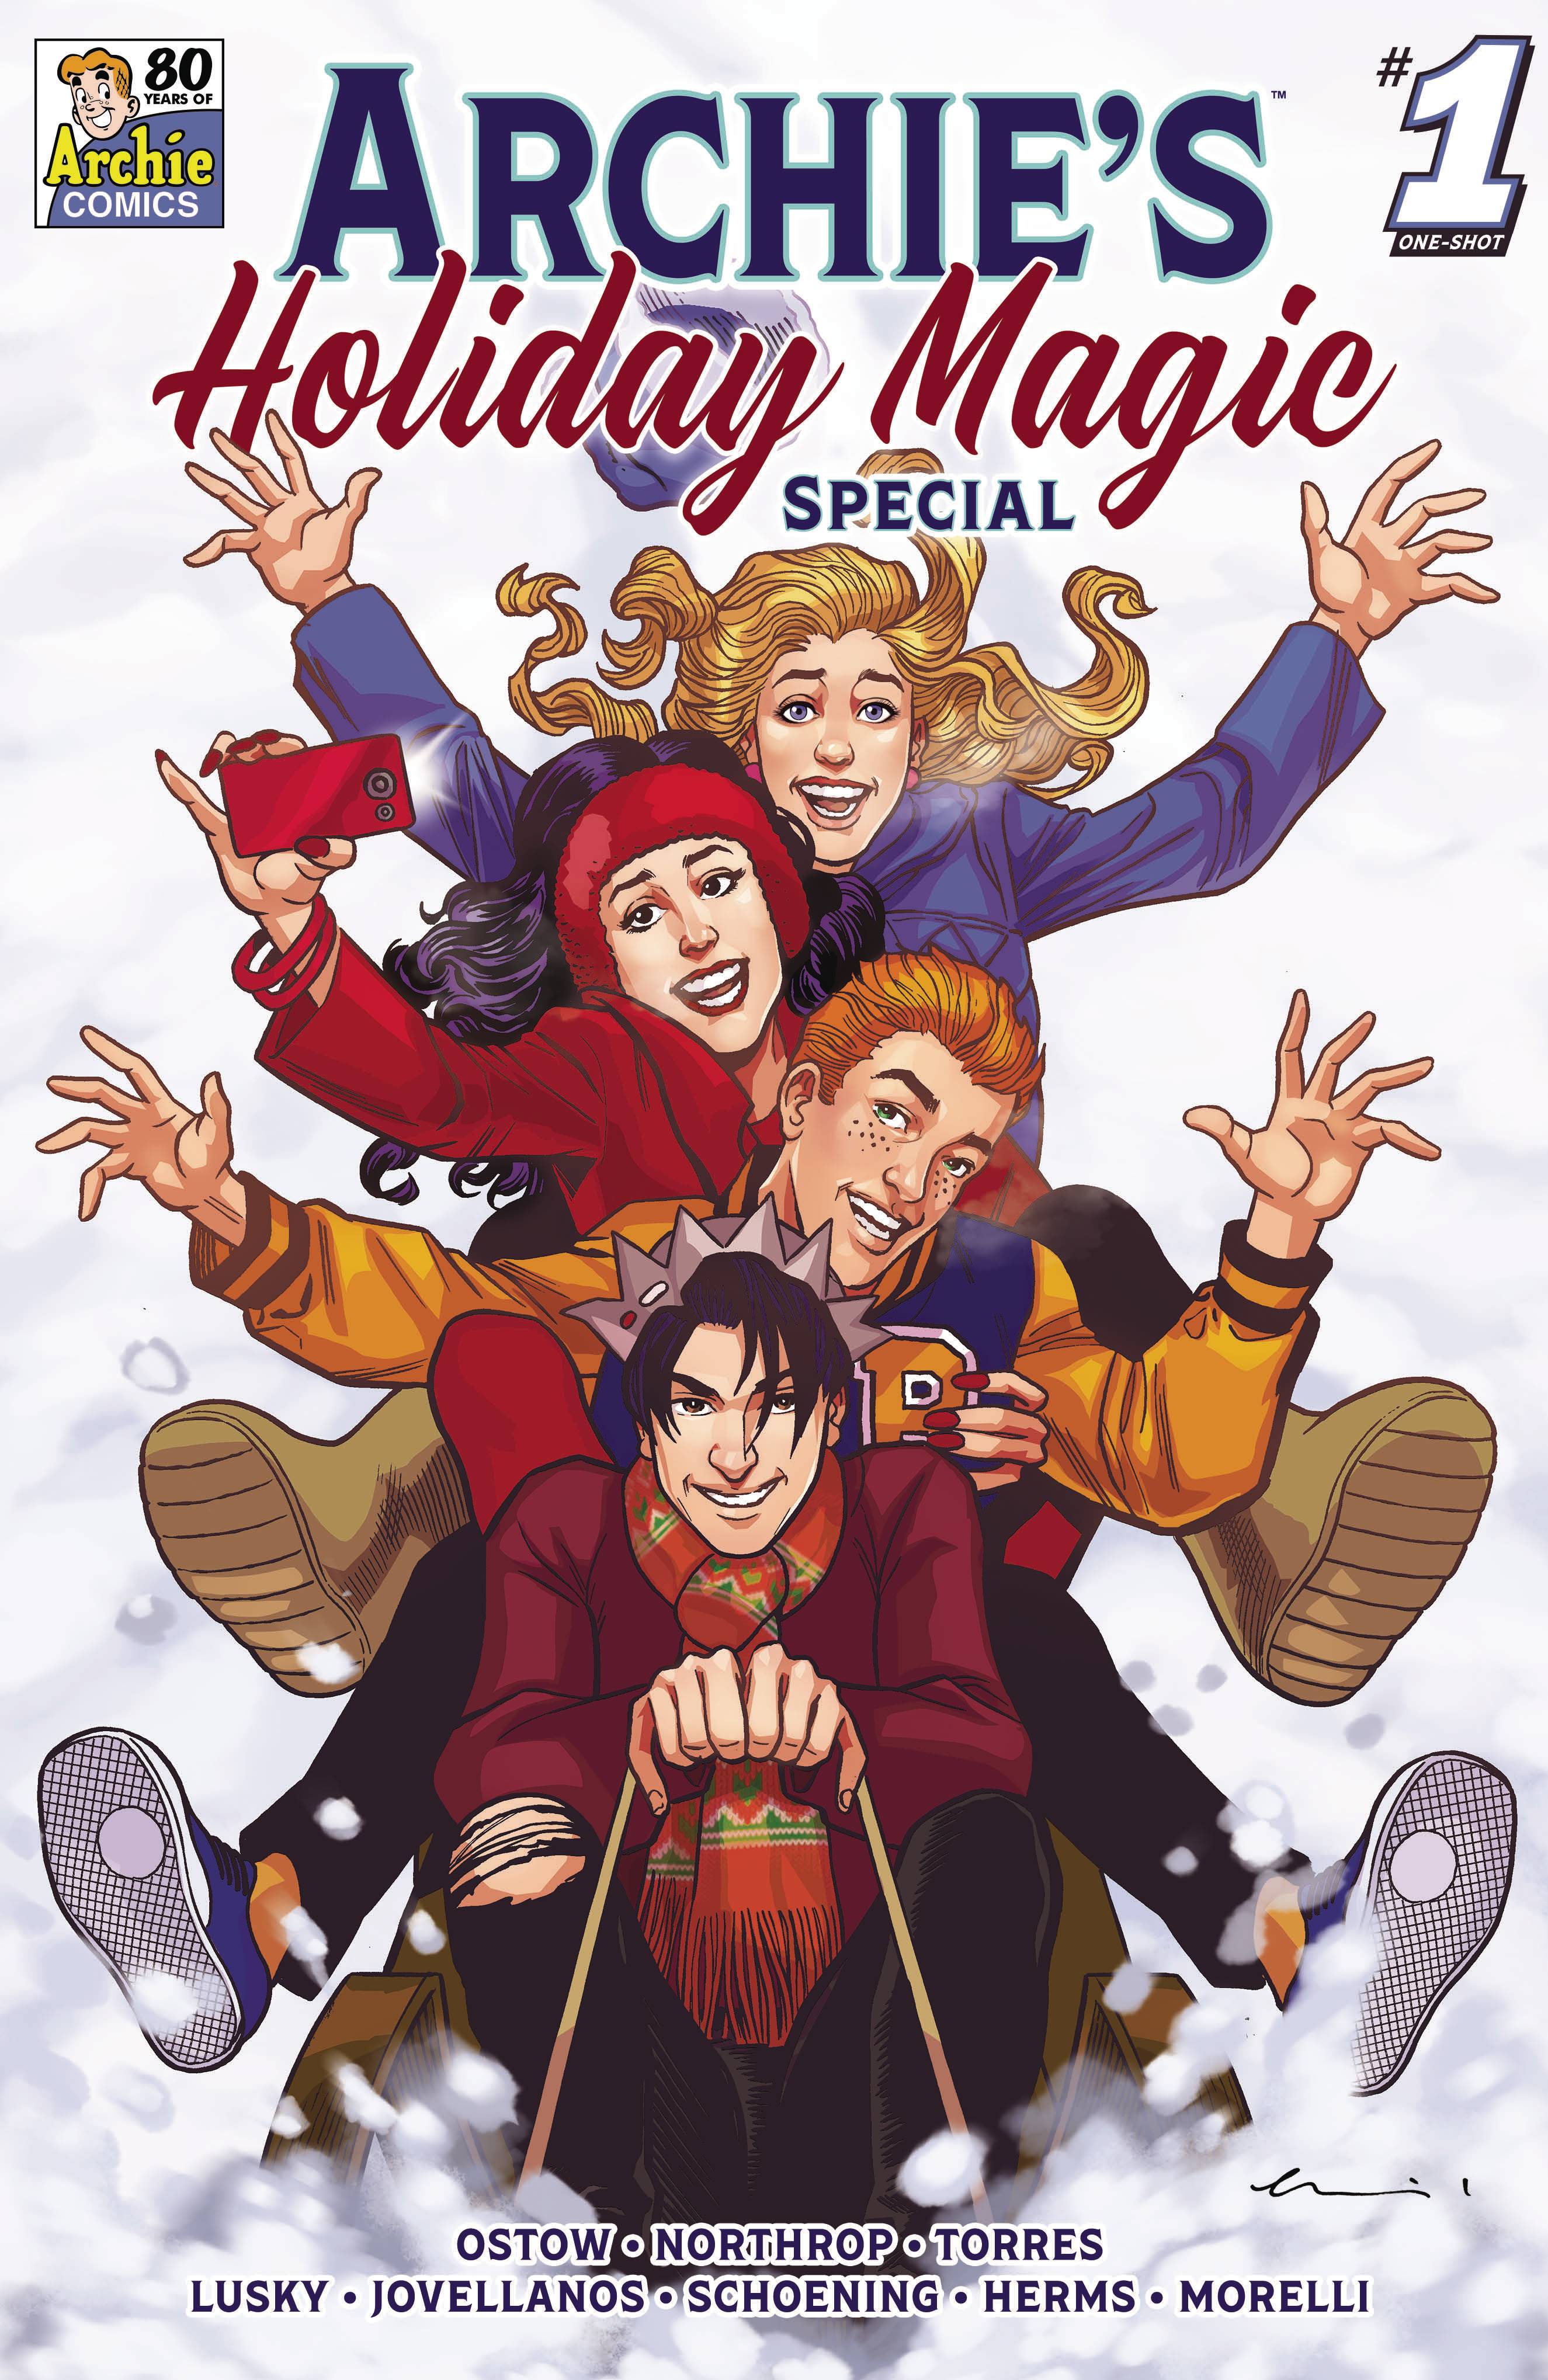 Archies Holiday Magic Special One Shot Cvr B Erskine (12/08/2021) - State of Comics